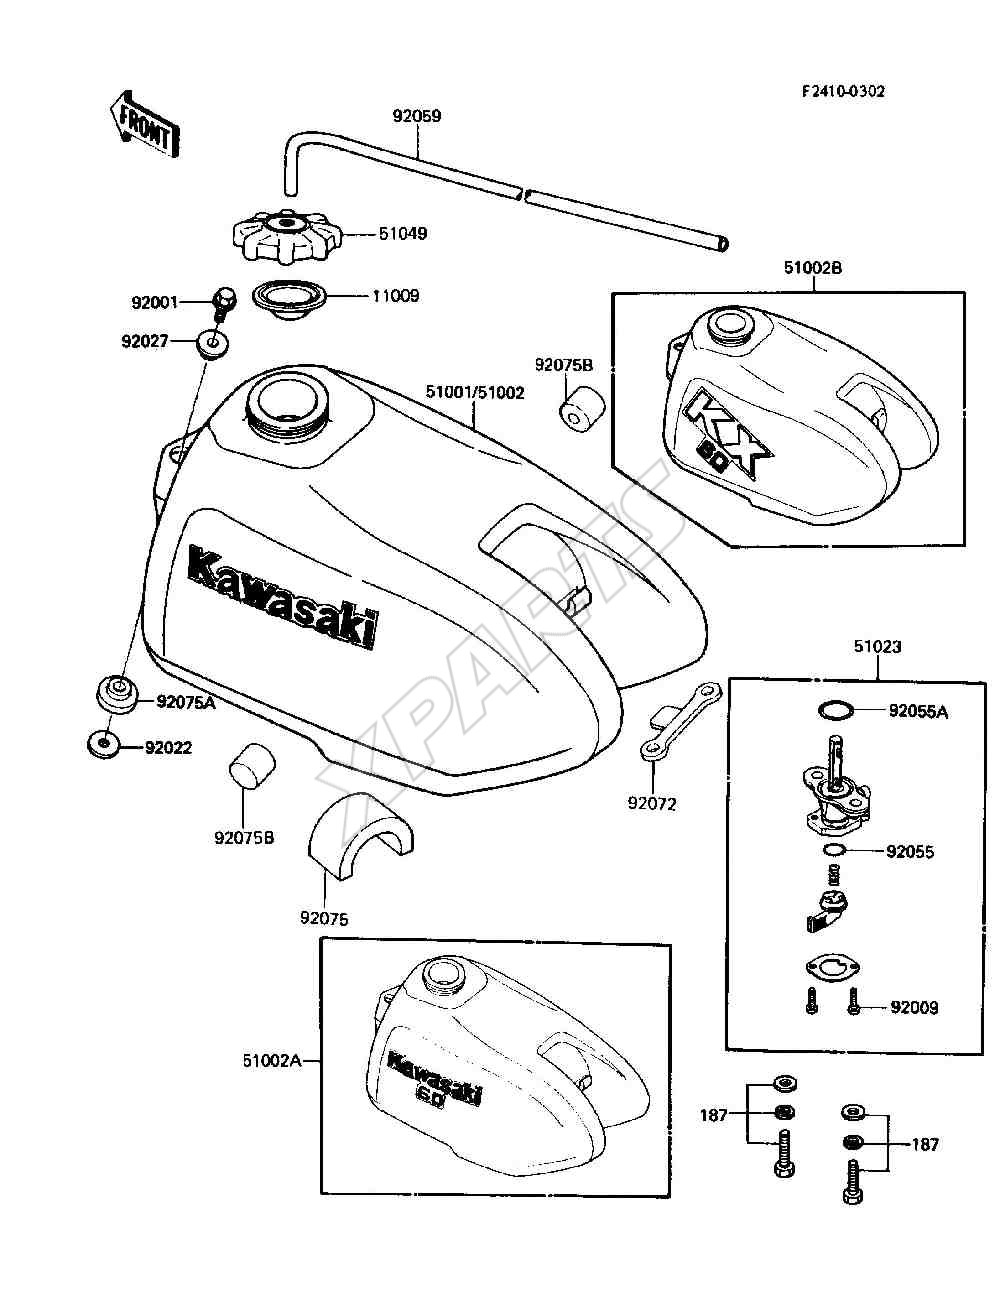 Picture for category Fuel Tank